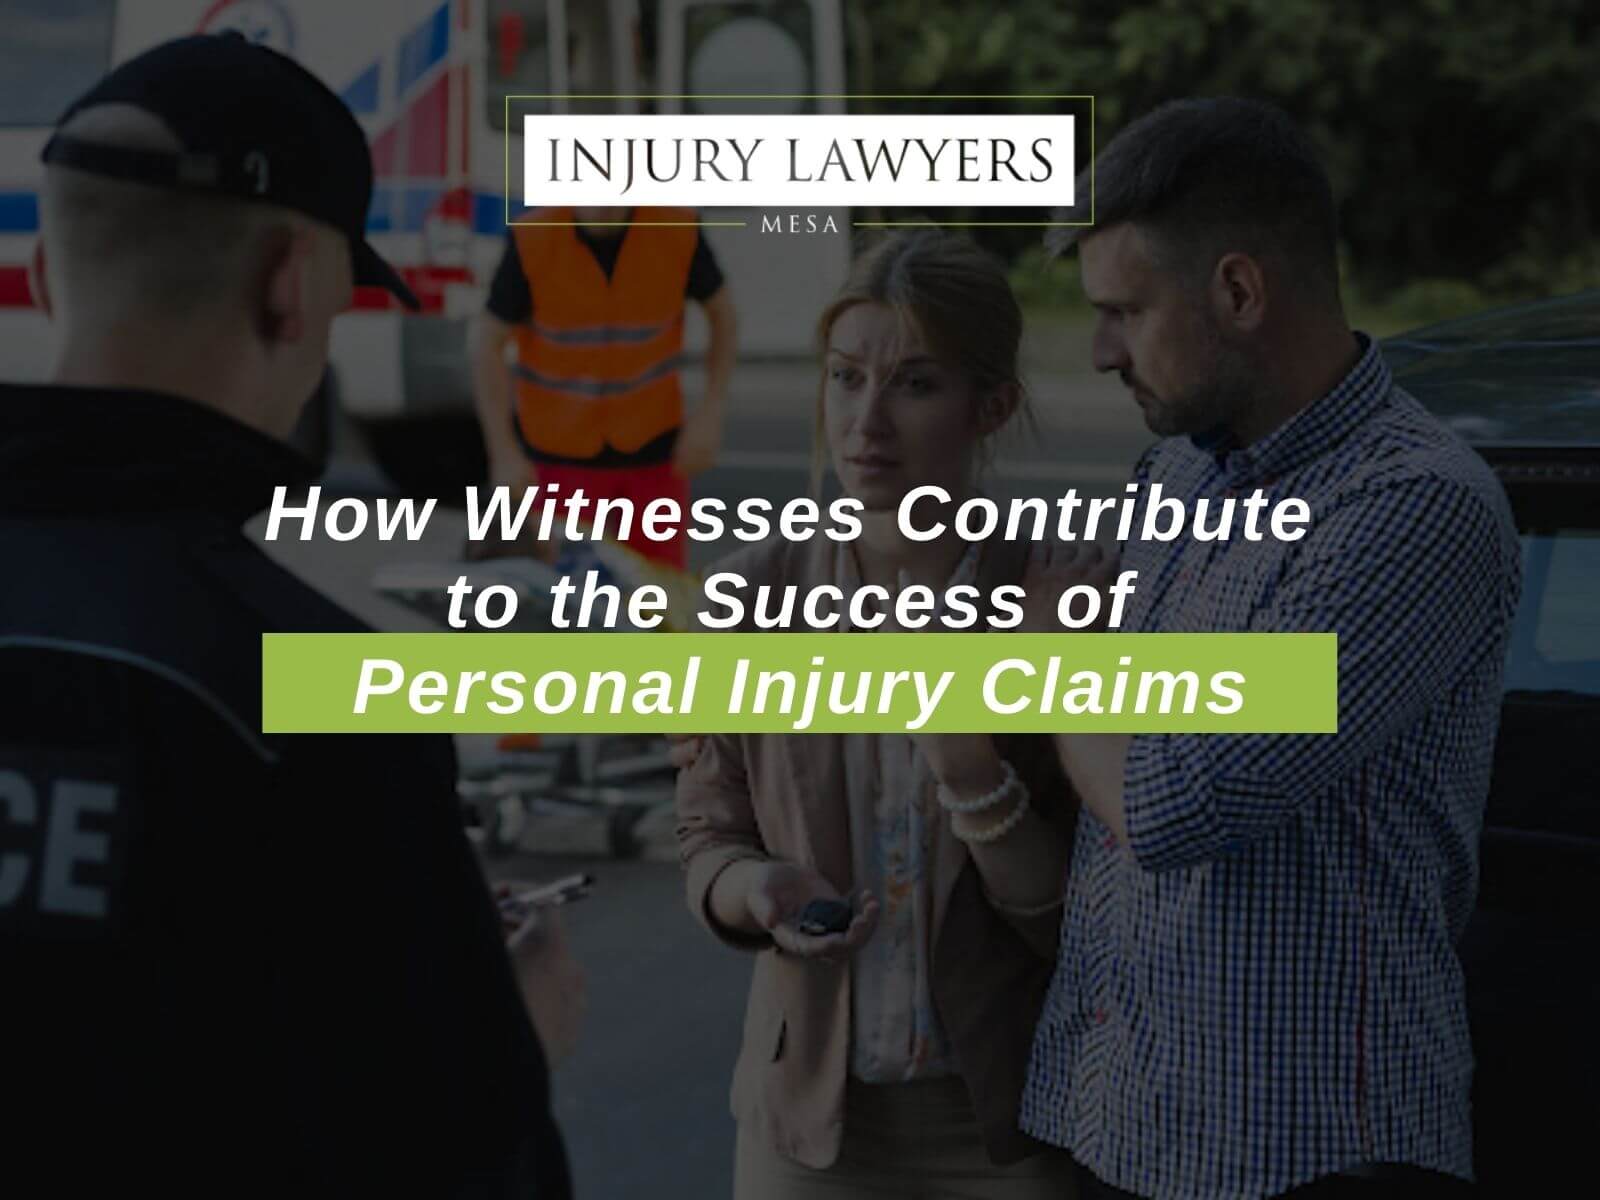 How Witnesses Contribute to the Success of Personal Injury Claims